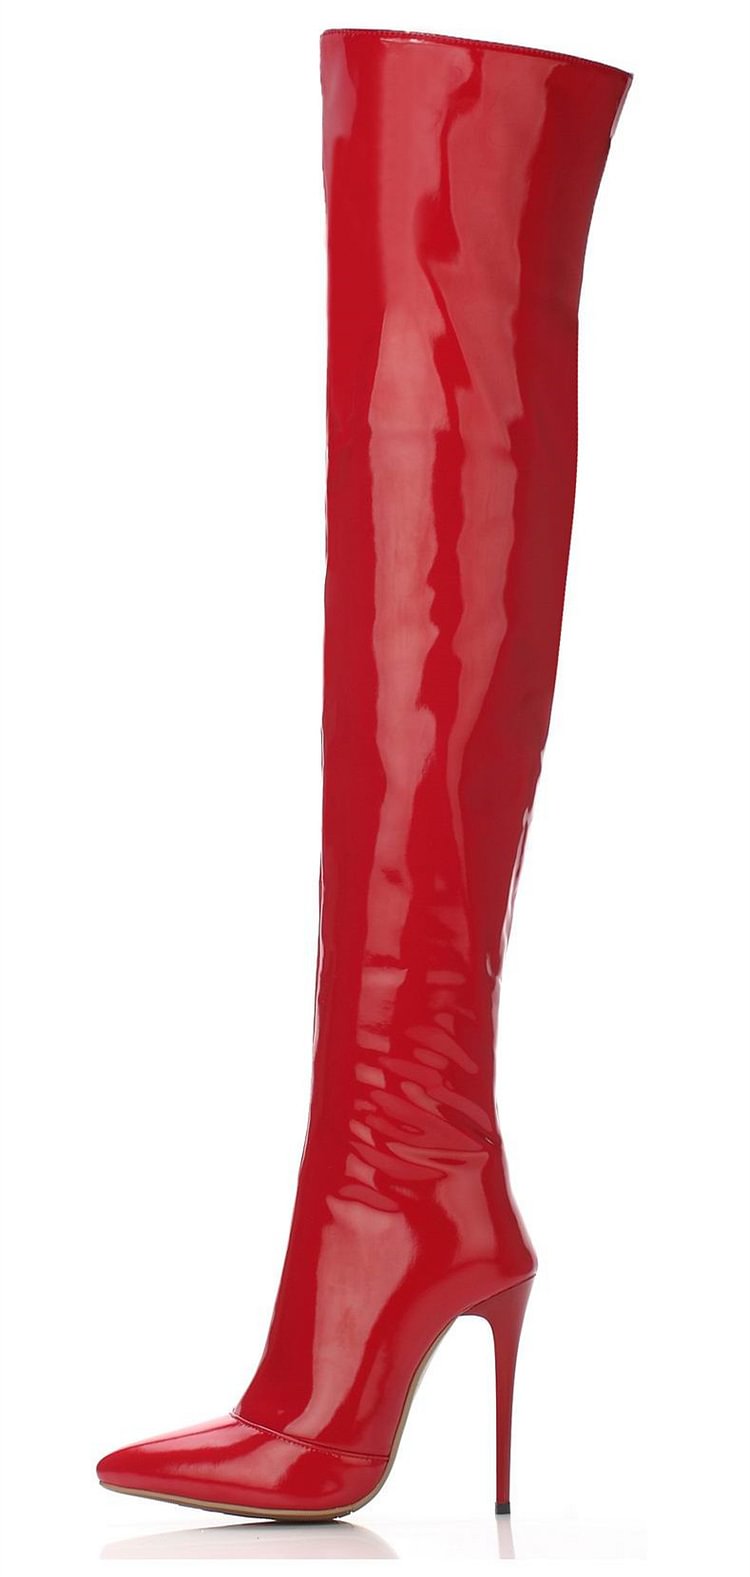 Red Long Boots Patent Leather Stiletto Heel Over-the-knee Boots |FSJ Shoes